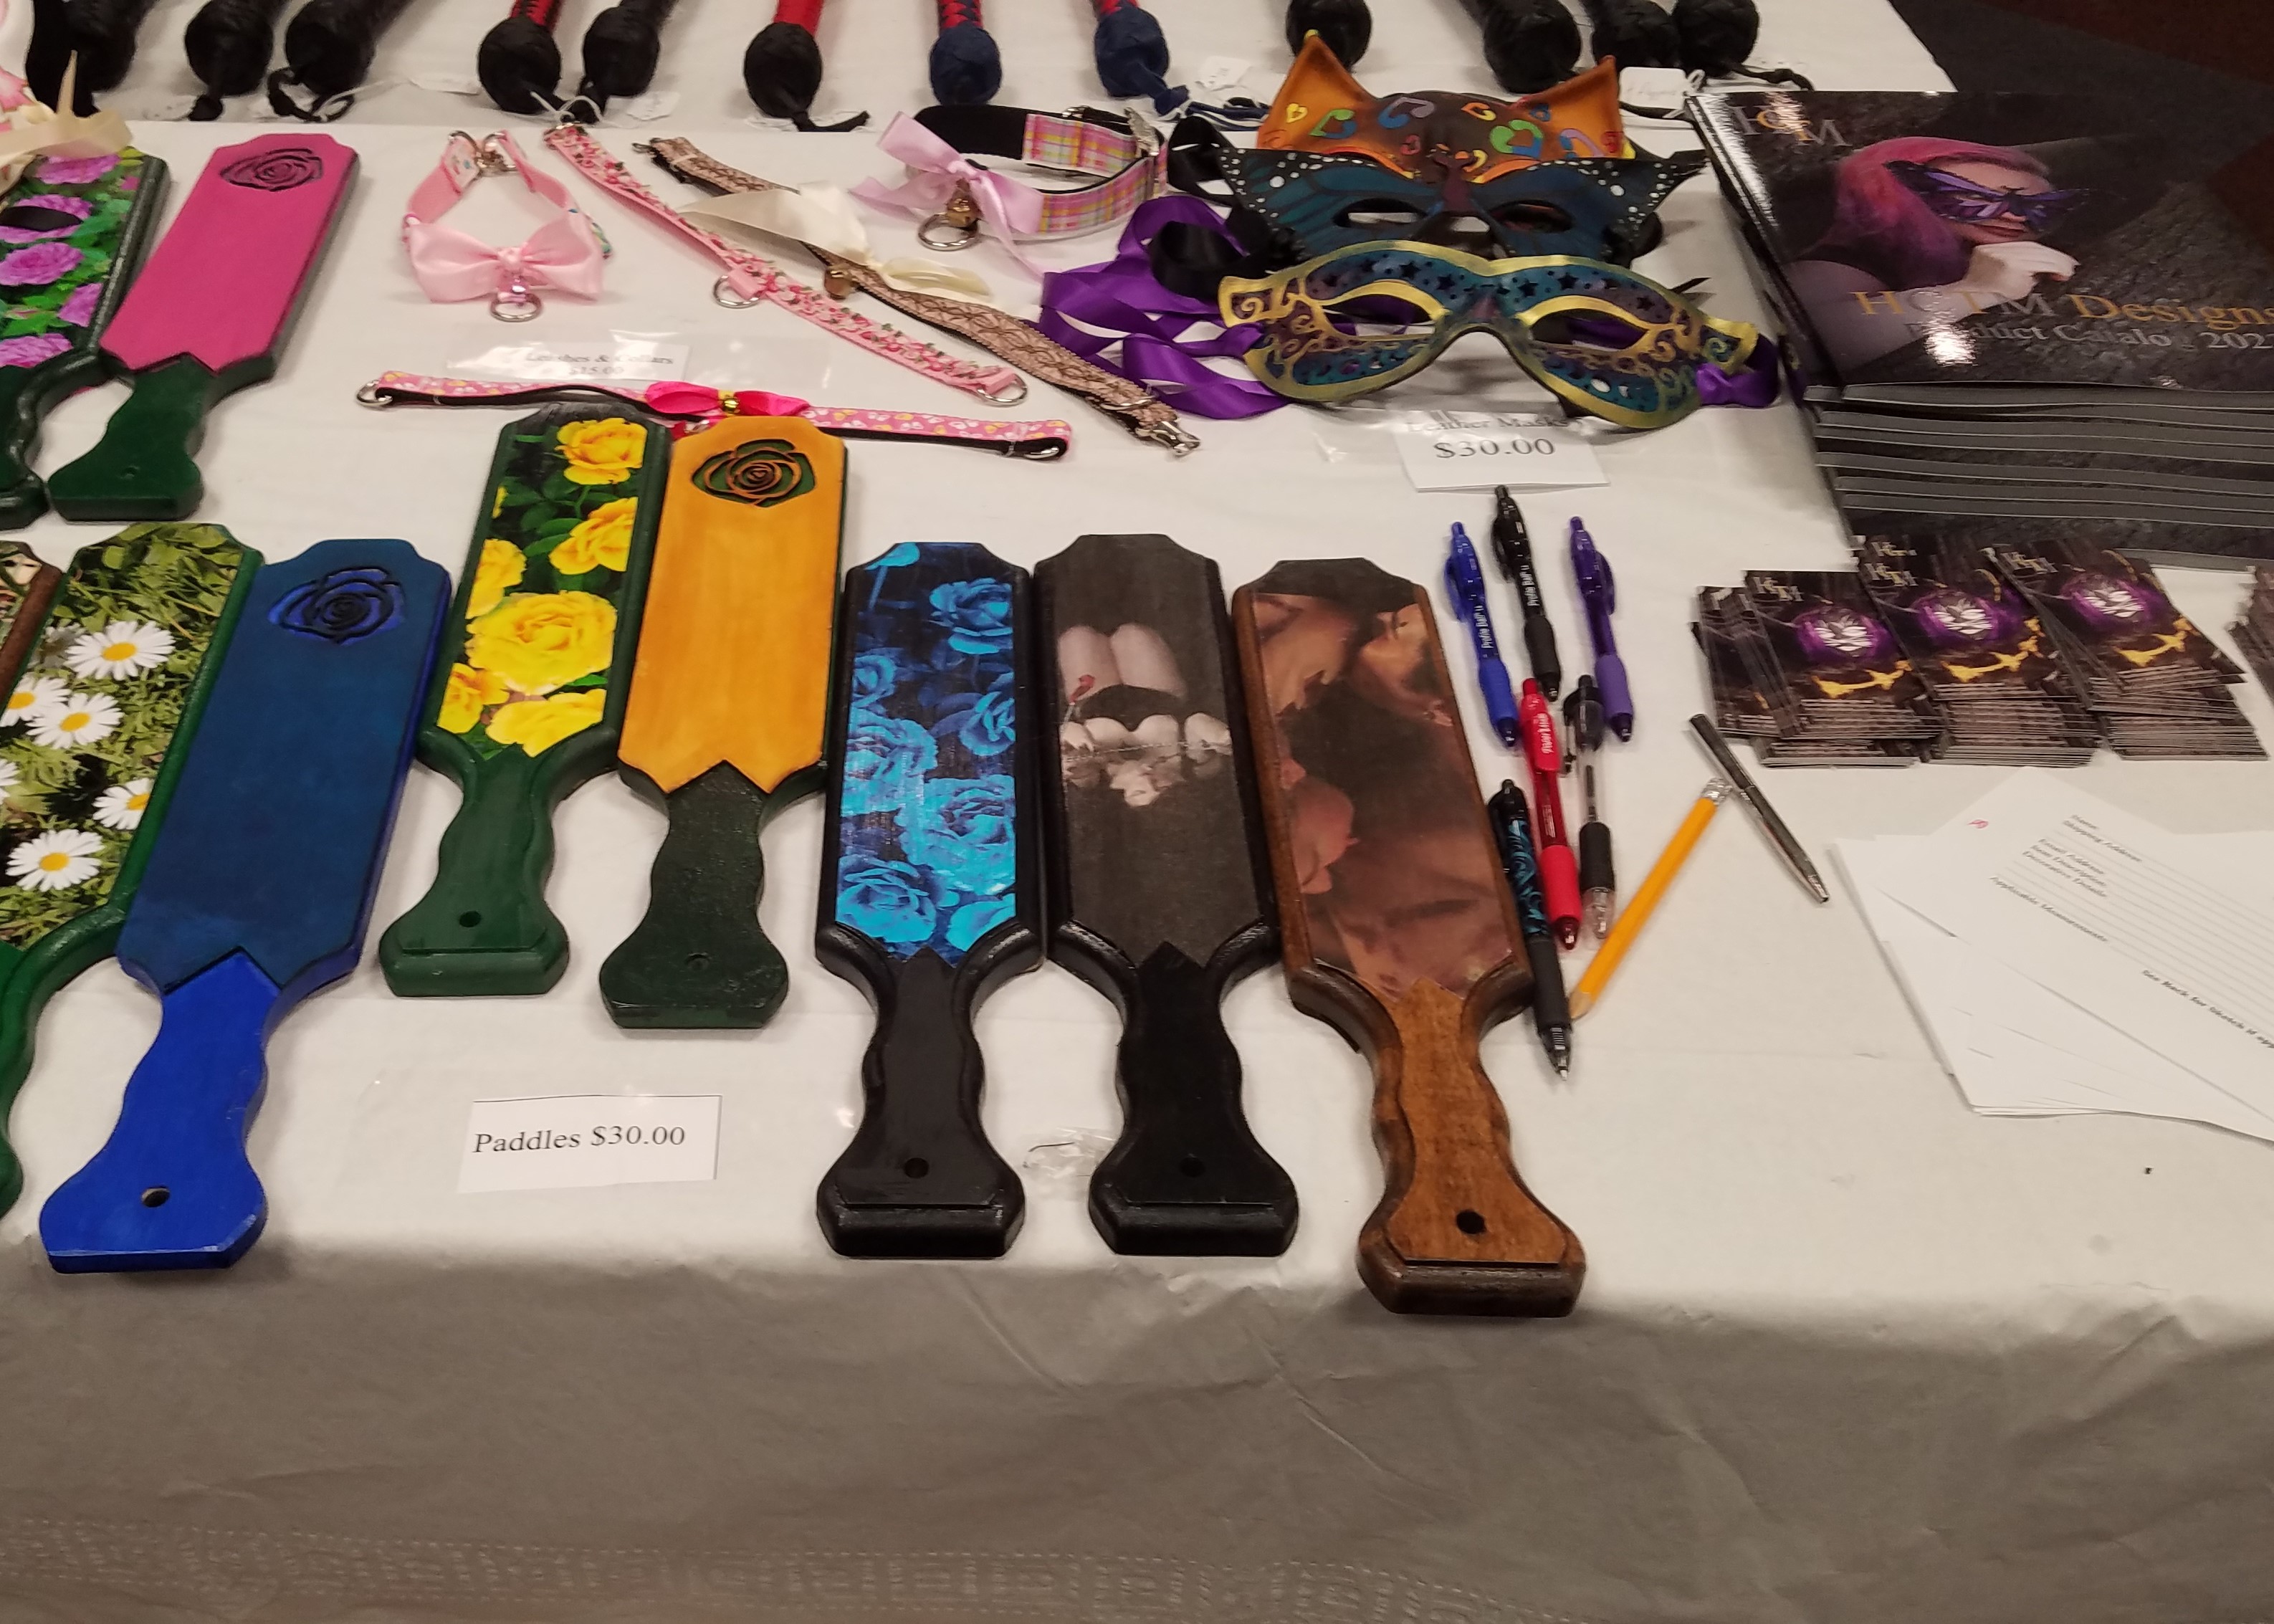 Photo of the rose paddles at a booth at Rochester Erotic Arts Festival.